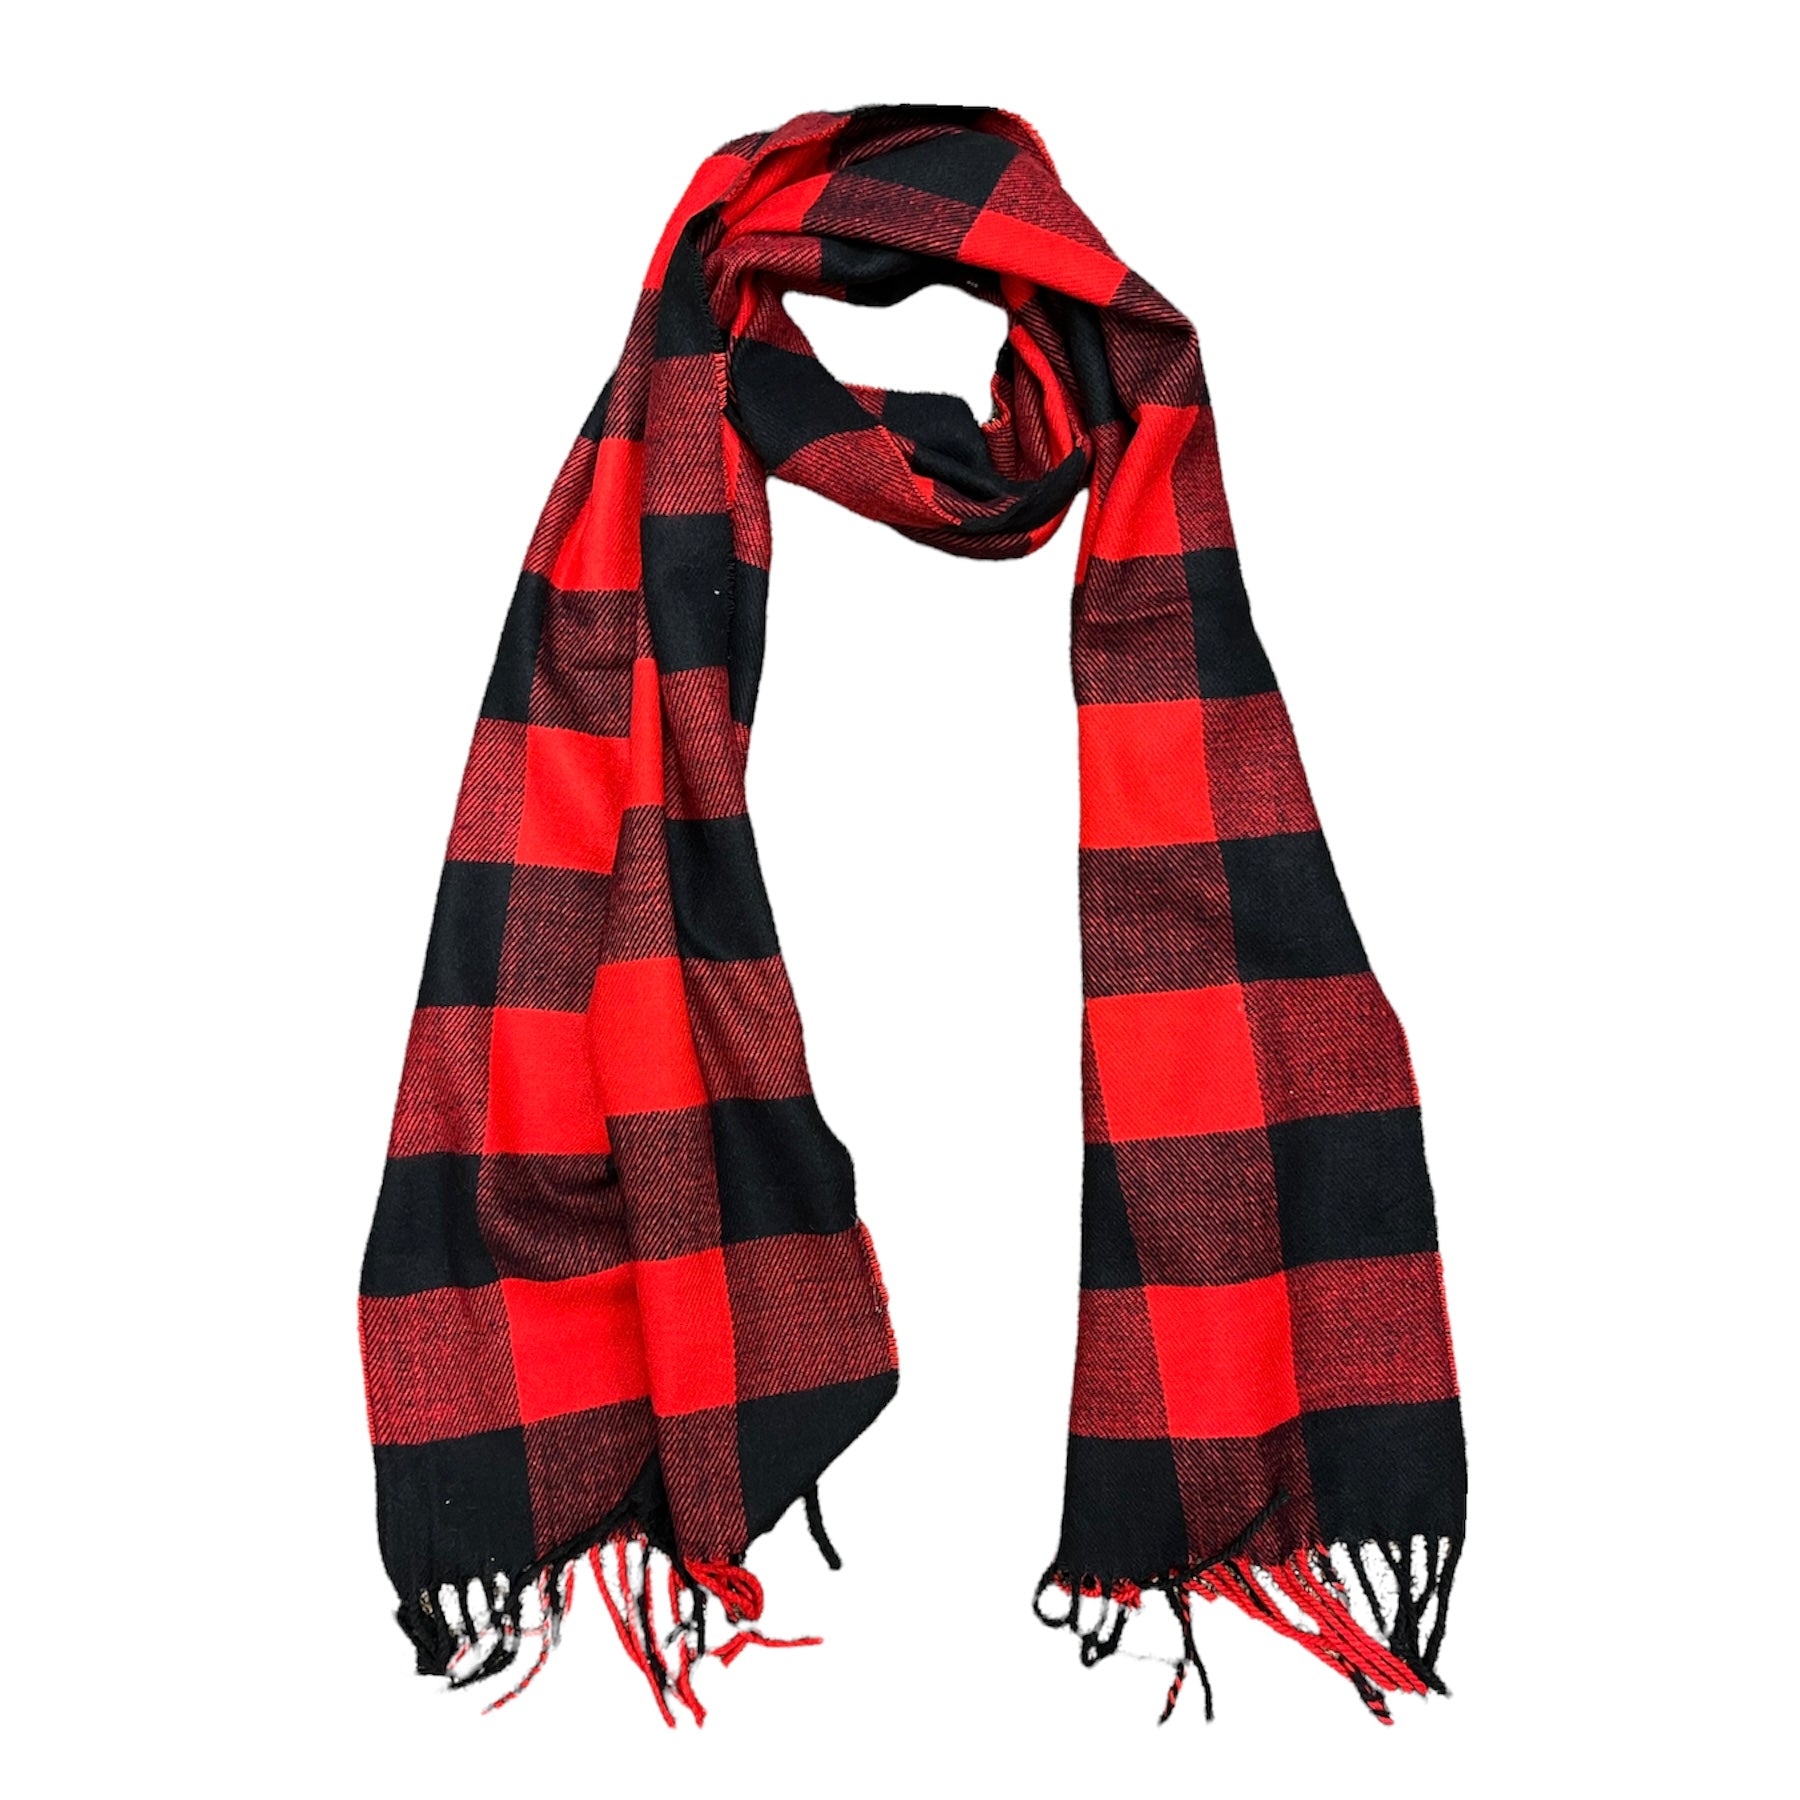 IVY LEAGUE SCARF - BLACK & RED